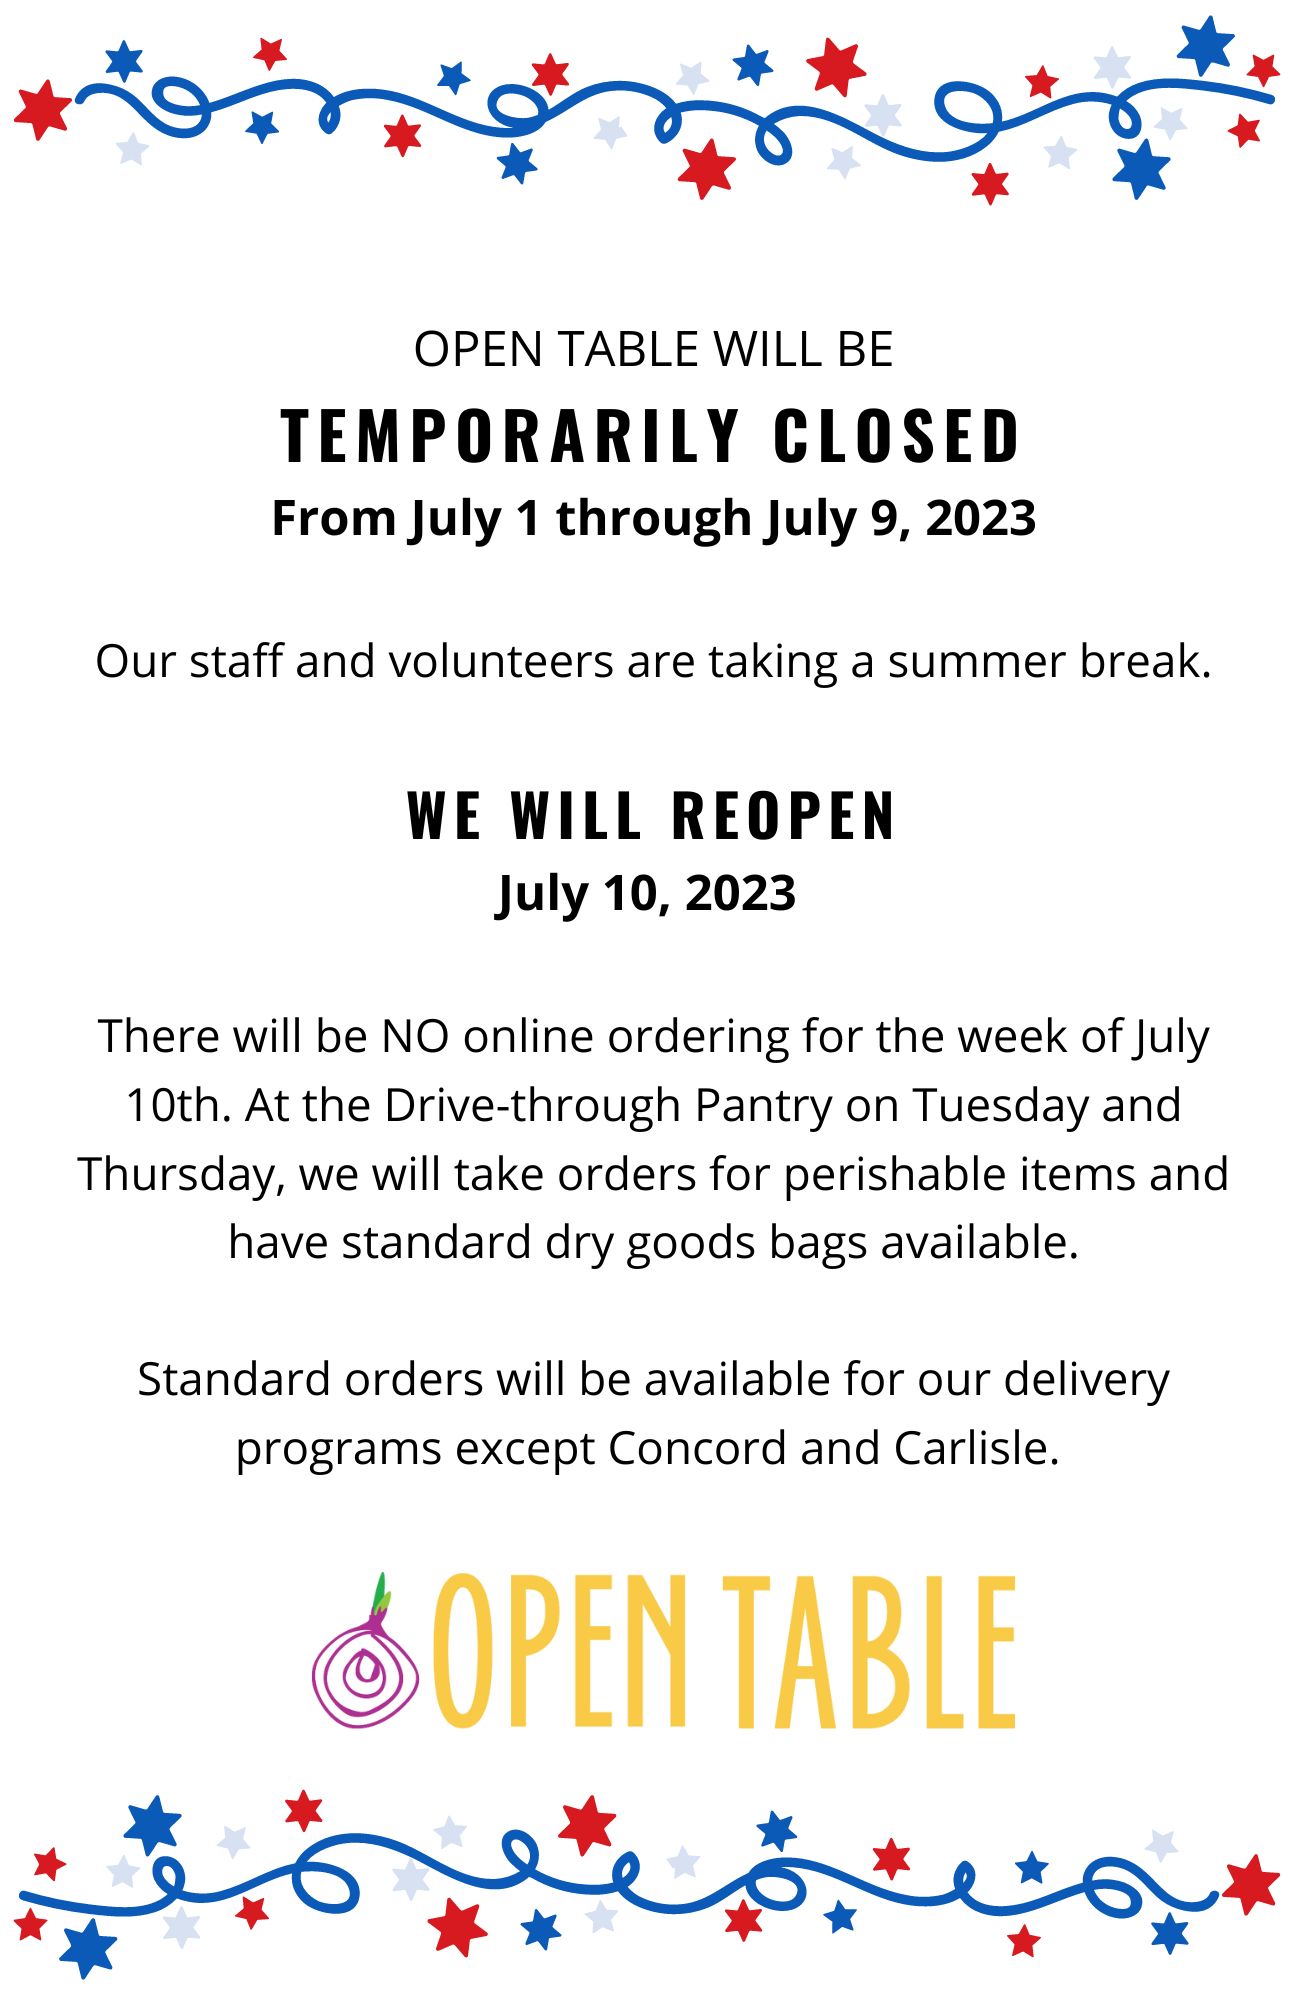 Open Table will be temporarily closed July 1 through July 9, 2023